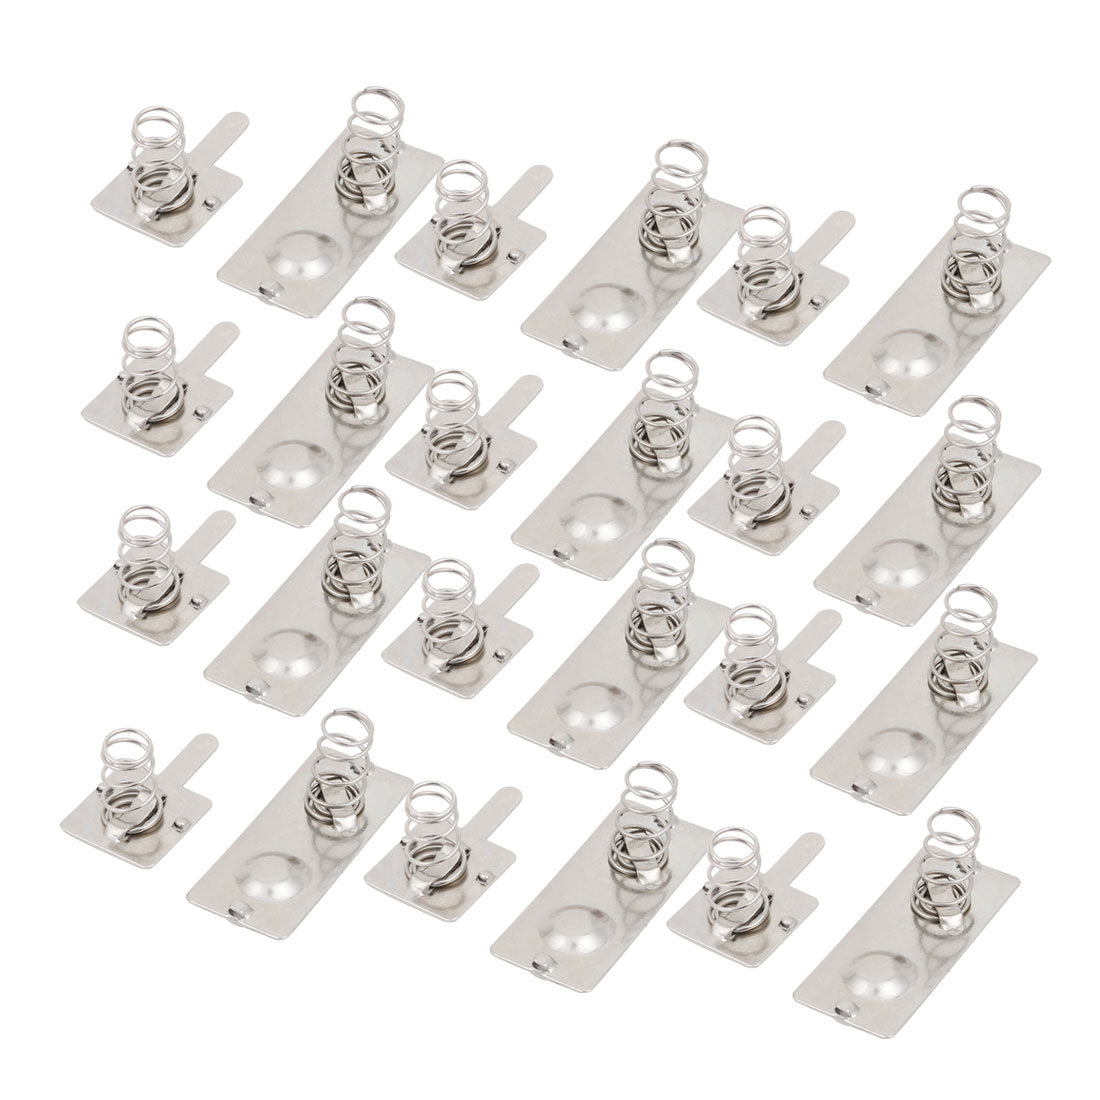 uxcell Uxcell 12pcs Silver Tone Metal AA Alkaline Button Coin Battery Plate